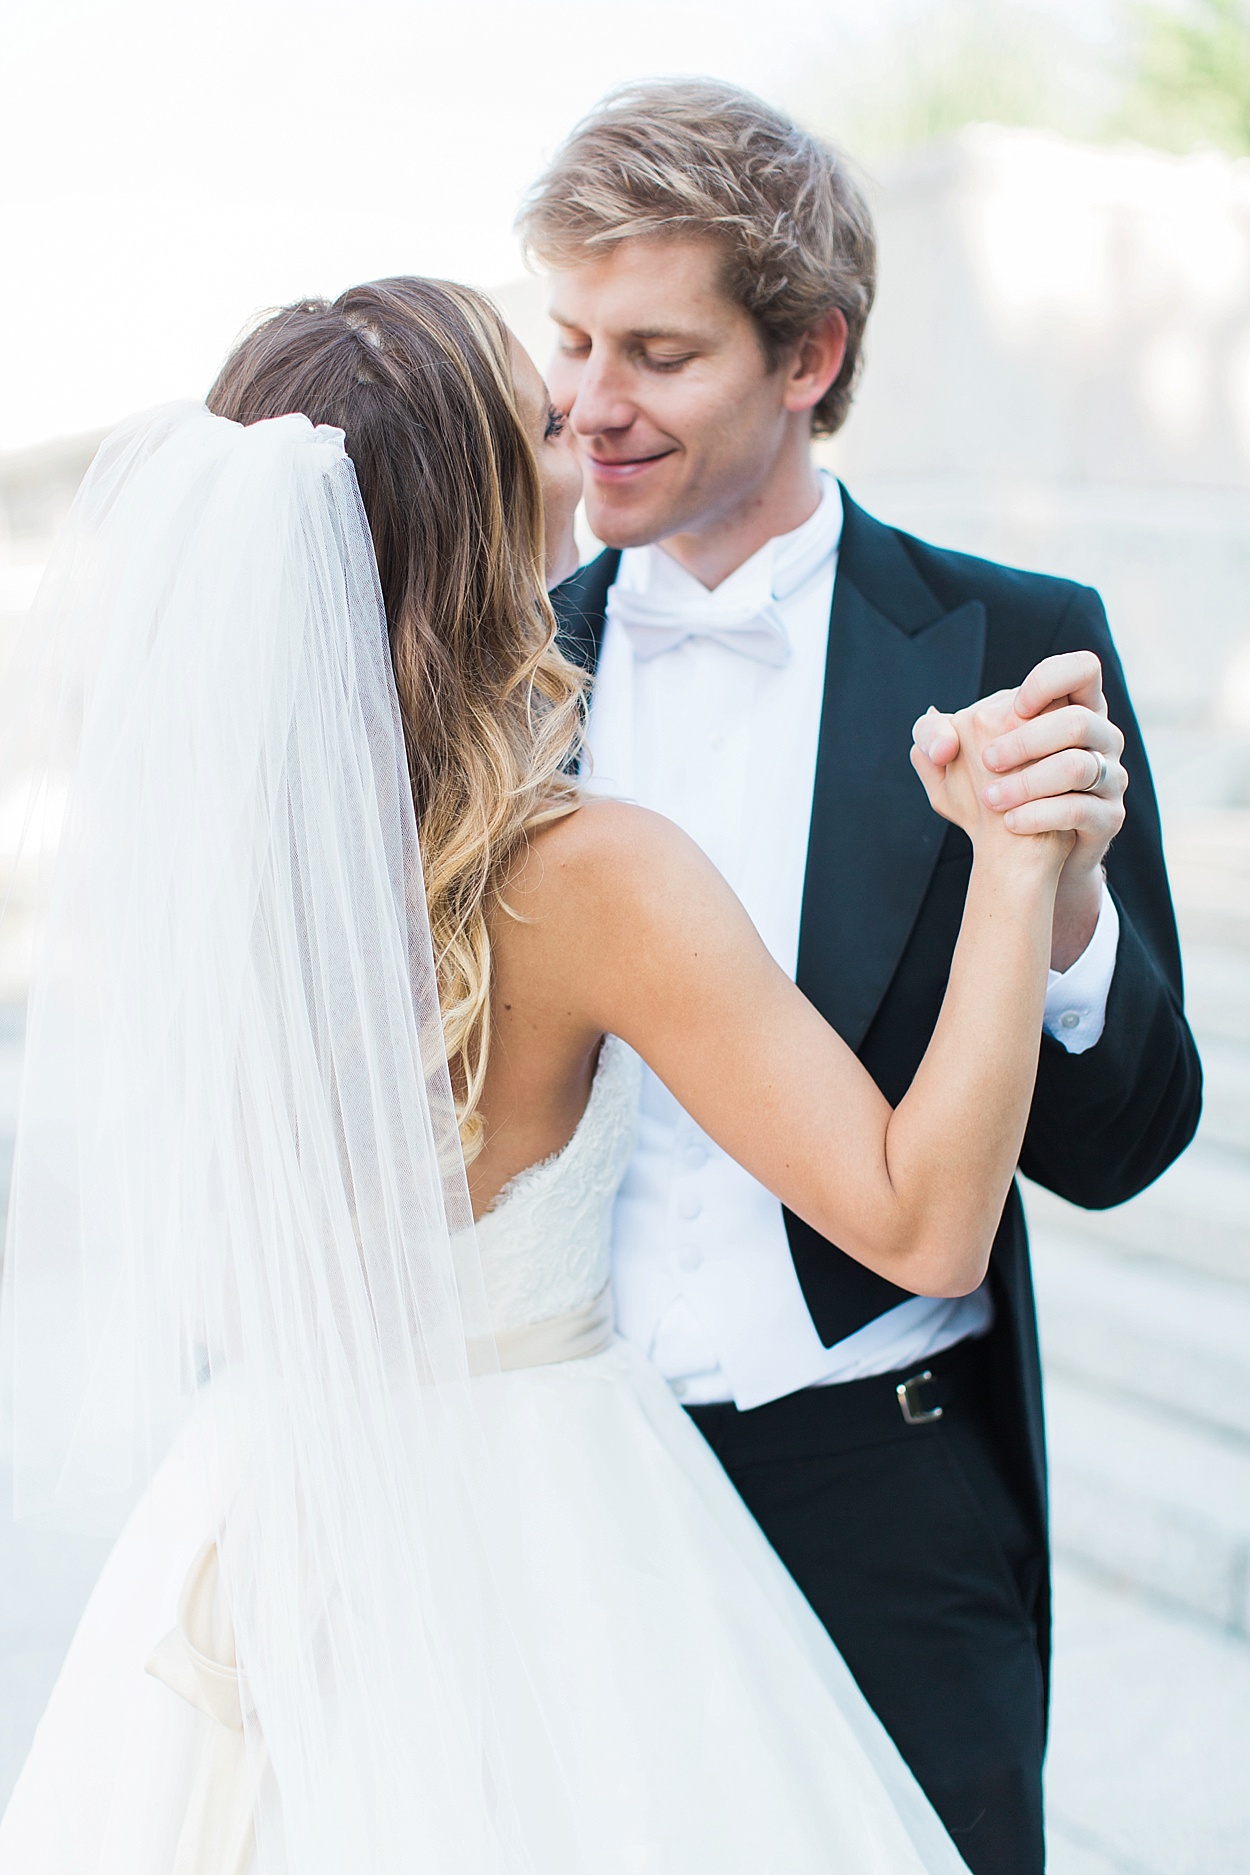 Classic black tie wedding at the Willard Hotel DC | Abby Grace Photography